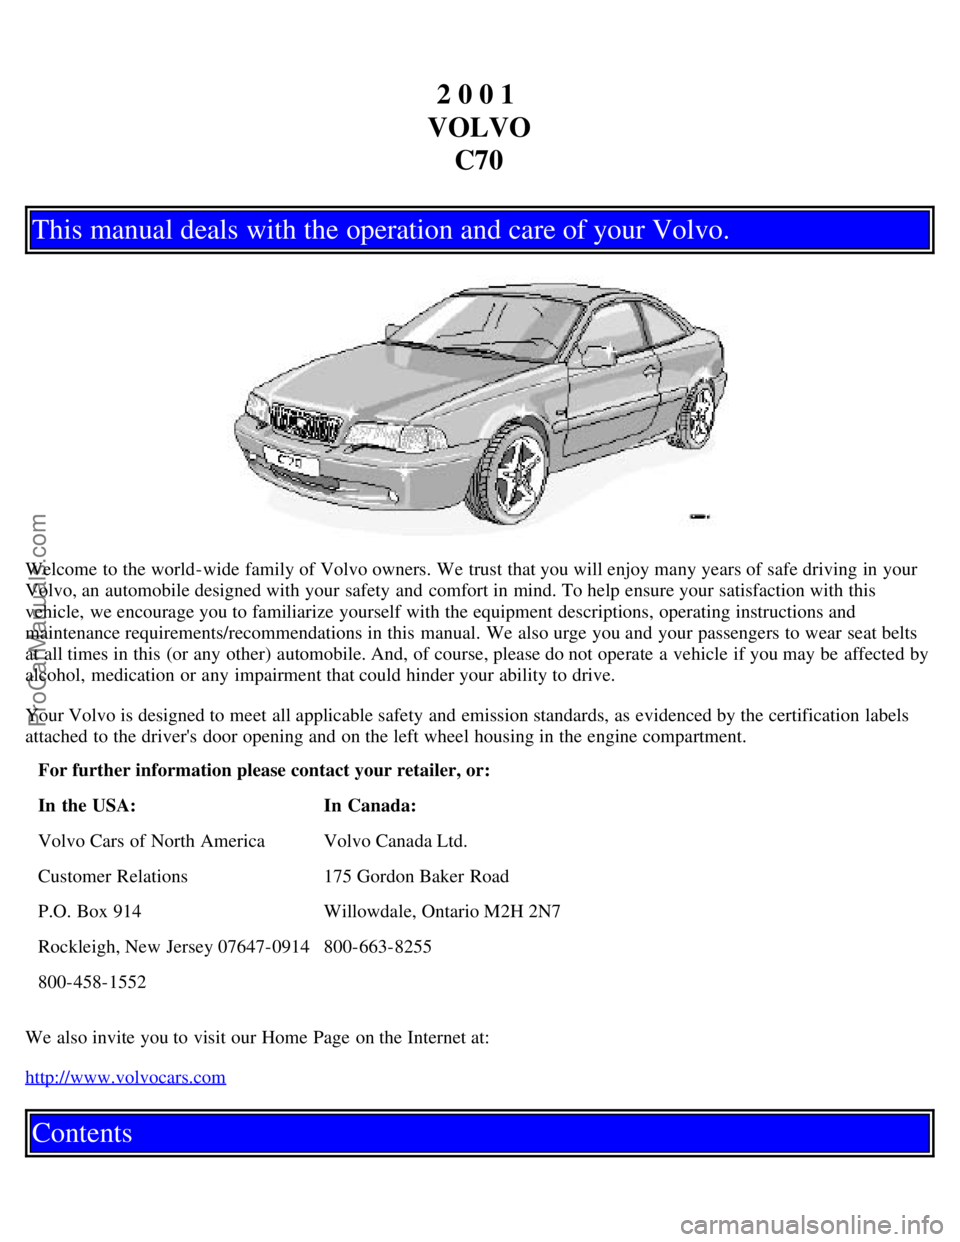 VOLVO C70 2001  Owners Manual 2 0 0 1 
VOLVO C70
This manual deals with the operation and care of your Volvo.
Welcome to the world-wide  family of Volvo owners. We trust that you will enjoy many years of safe driving in your
Volvo